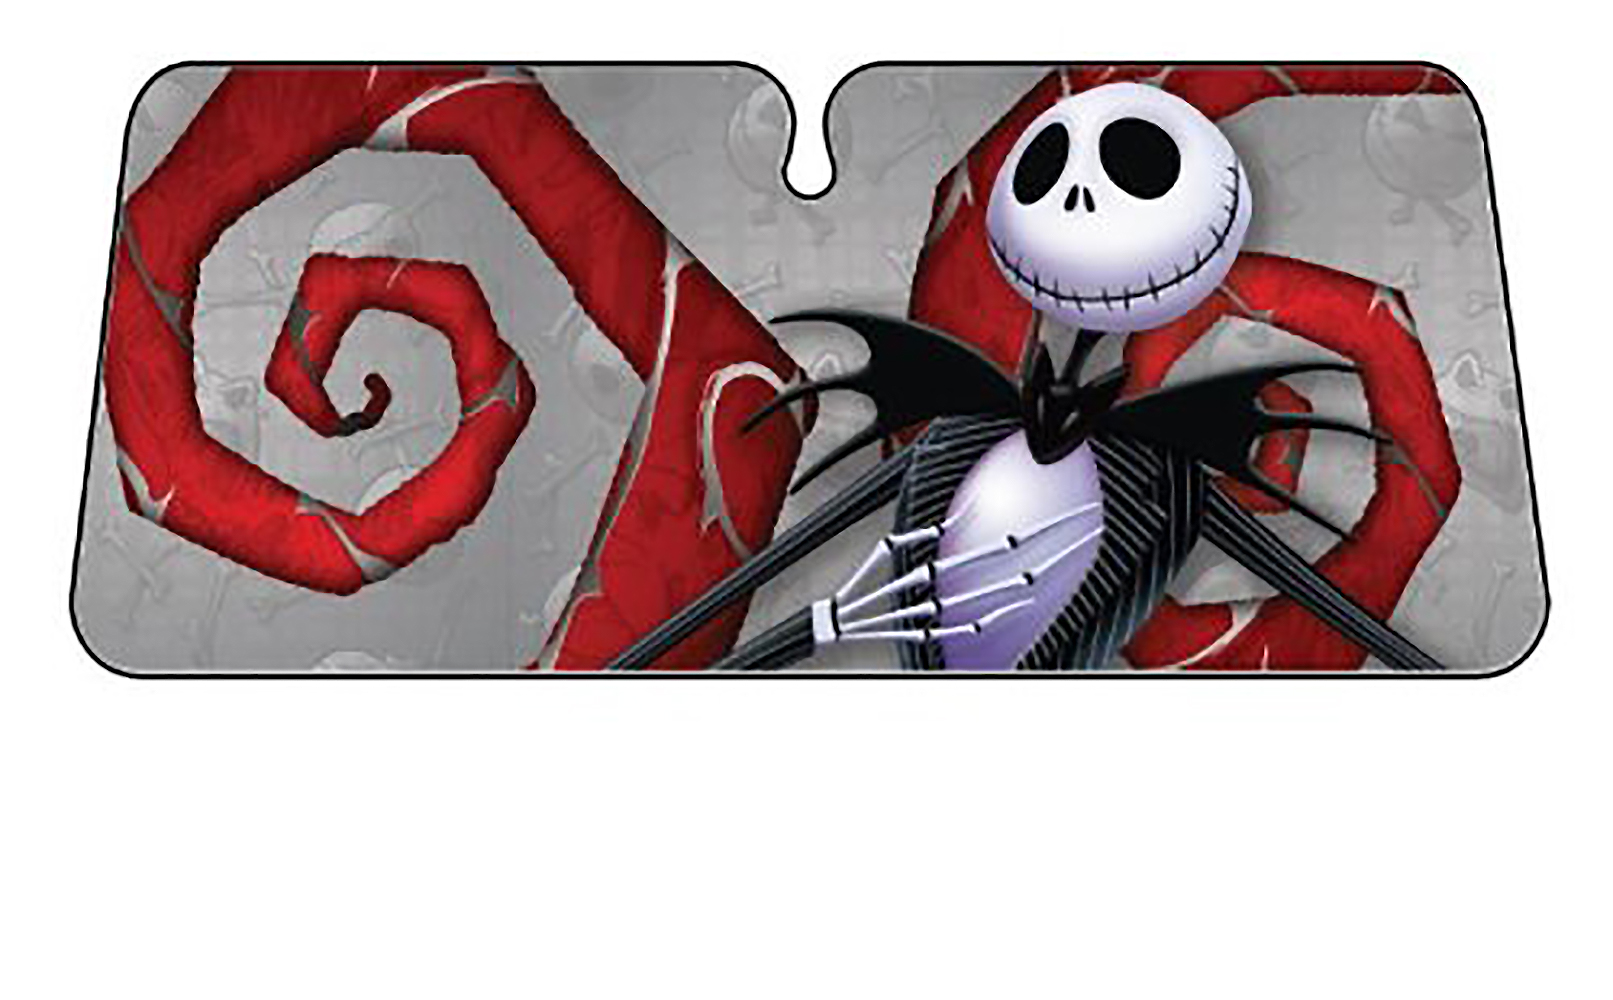 YupbizAuto Brand New Design Nightmare before Christmas Jack Skellington Car Truck SUV Seat Covers Floor Mats Accessories Set - image 2 of 10